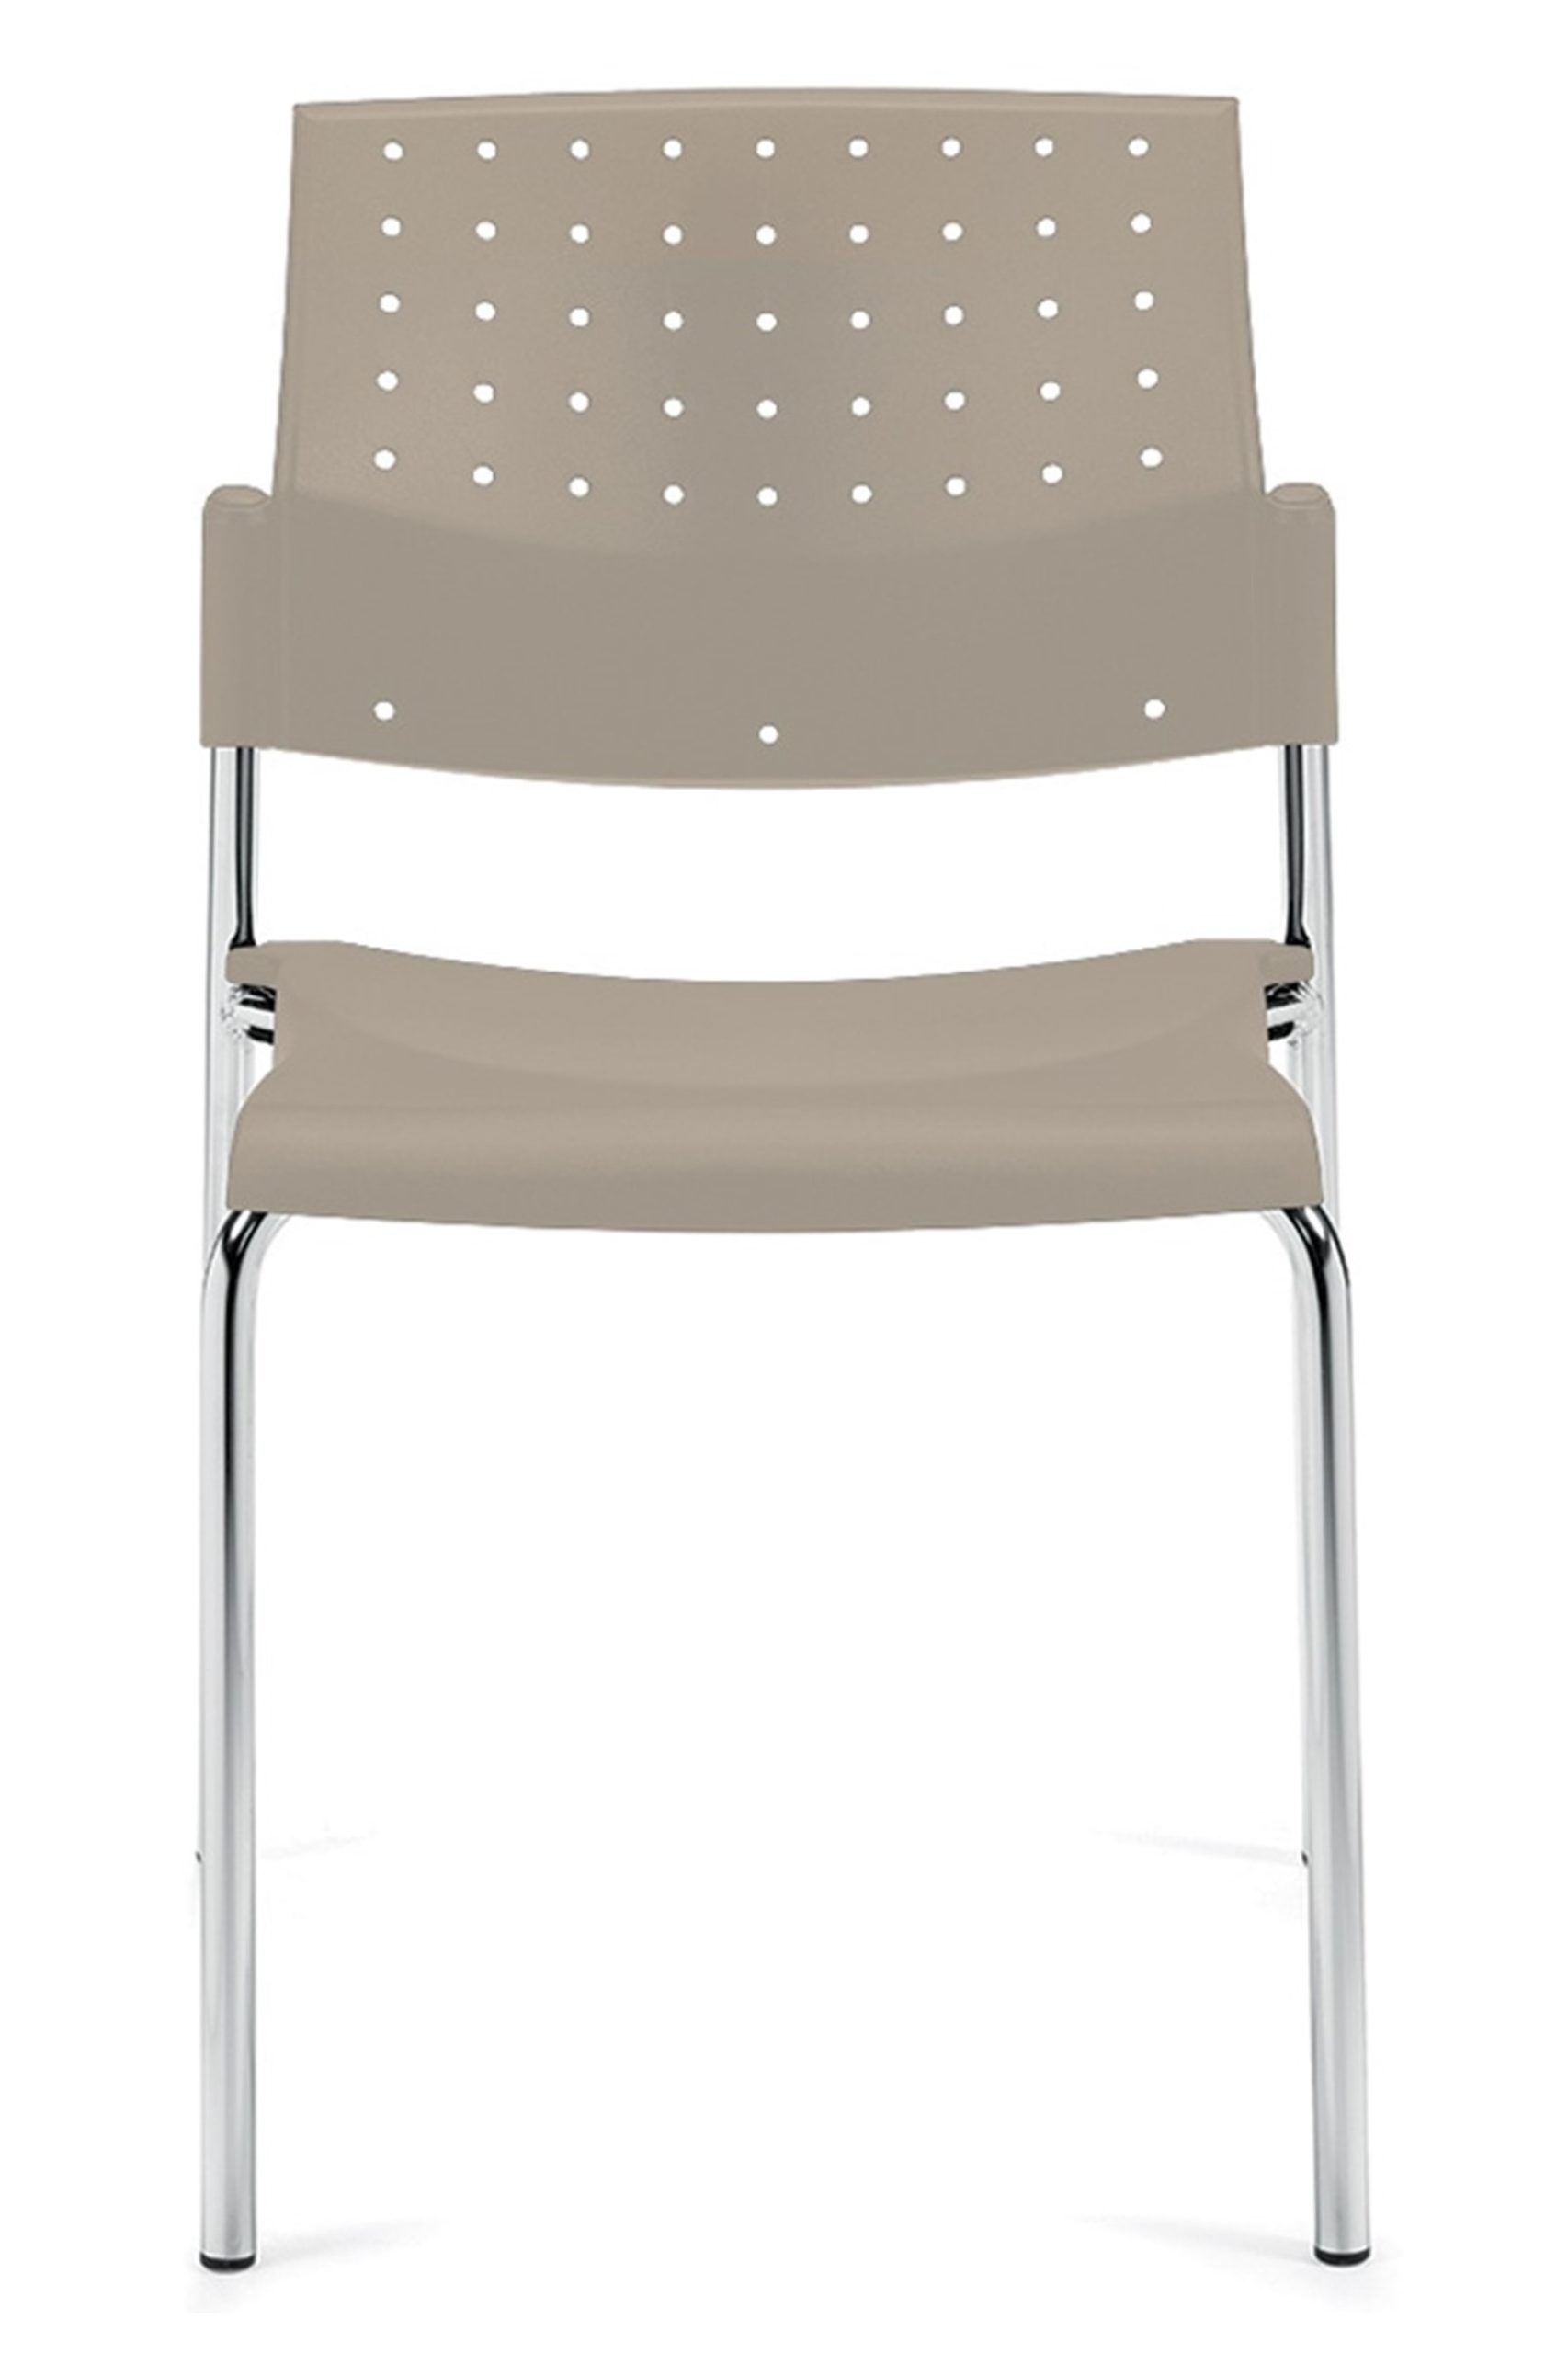 Armless stack chair in ivory polypropylene, solid steel rod sled base, contemporary perforated and angled back. Stacks 10 high on a chair dolly.